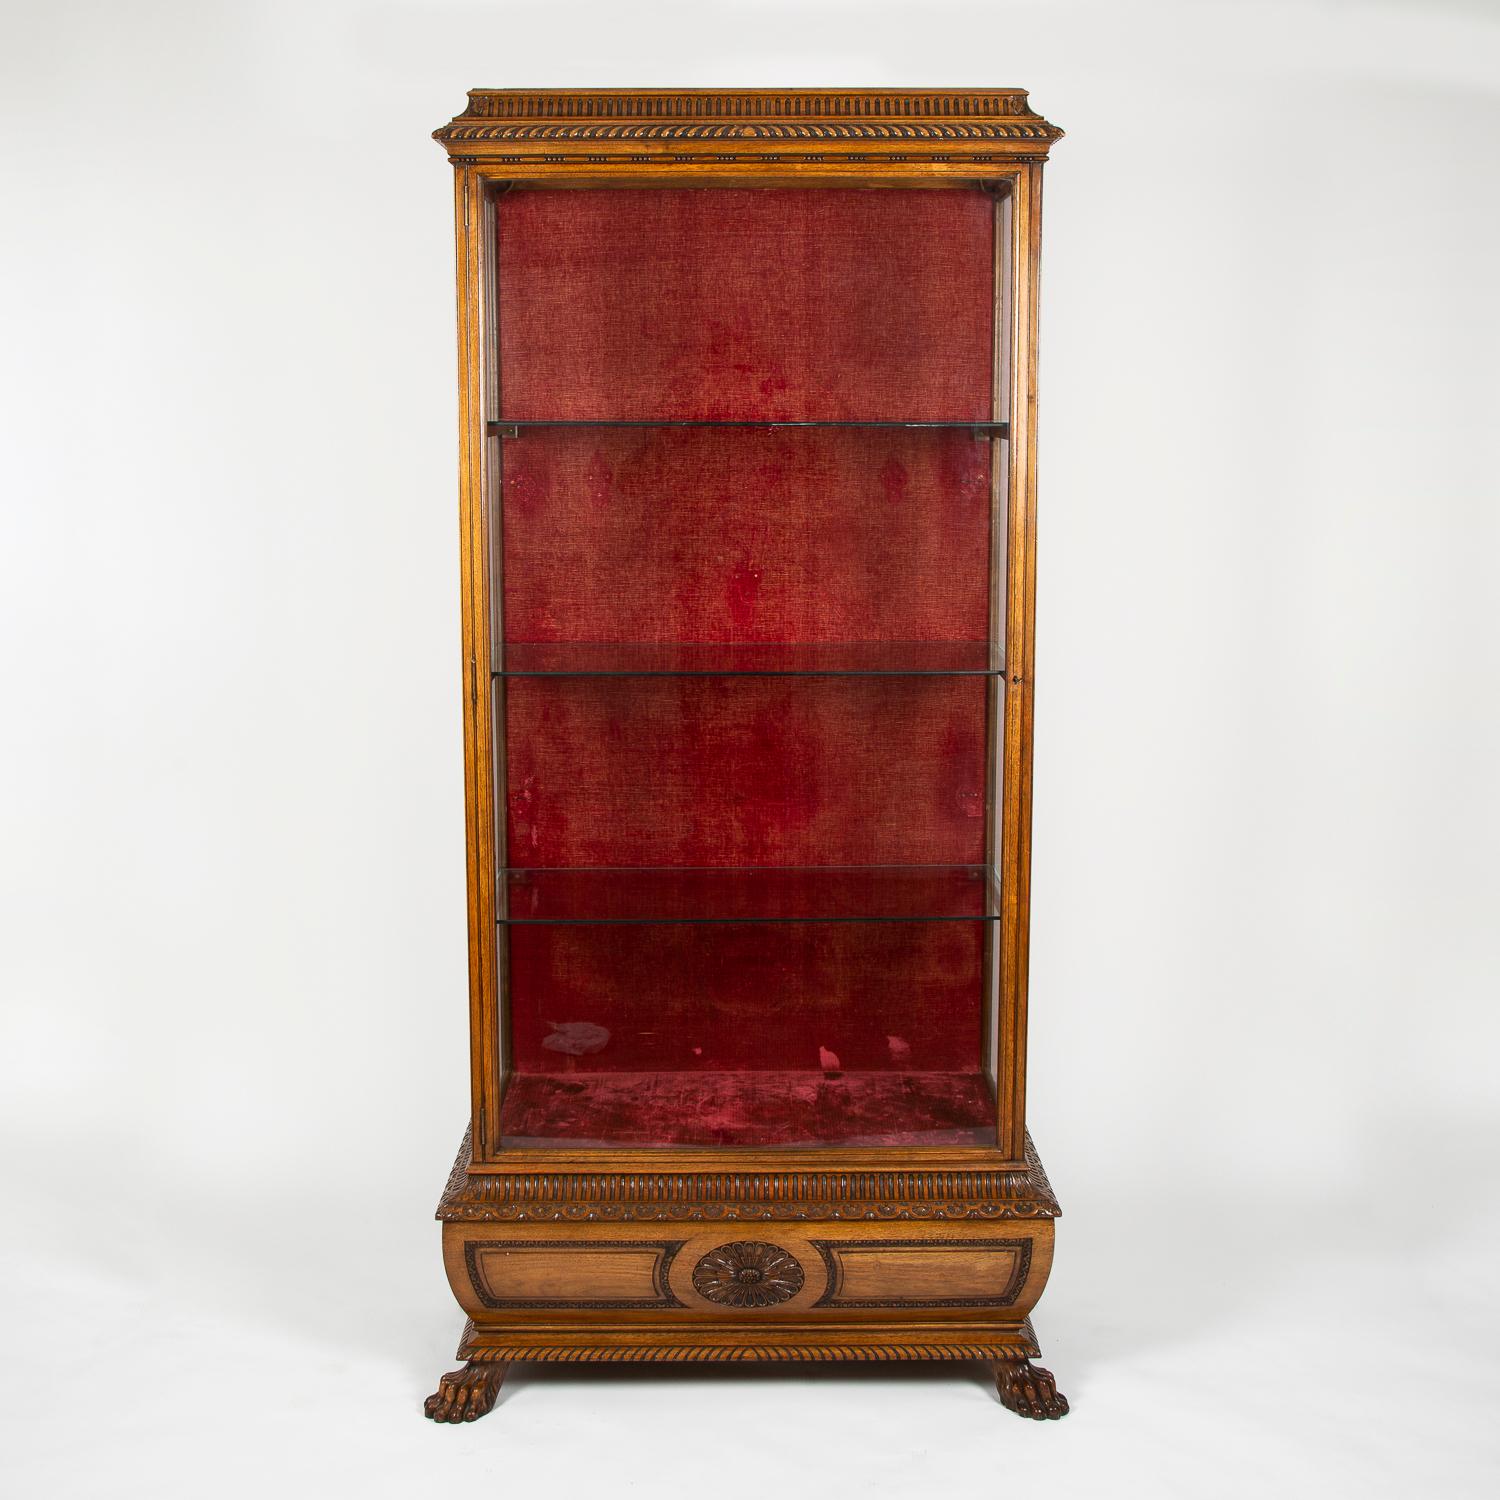 A large carved walnut display case, velvet lined, with three glass shelves, and two internal lights, English, circa 1910.